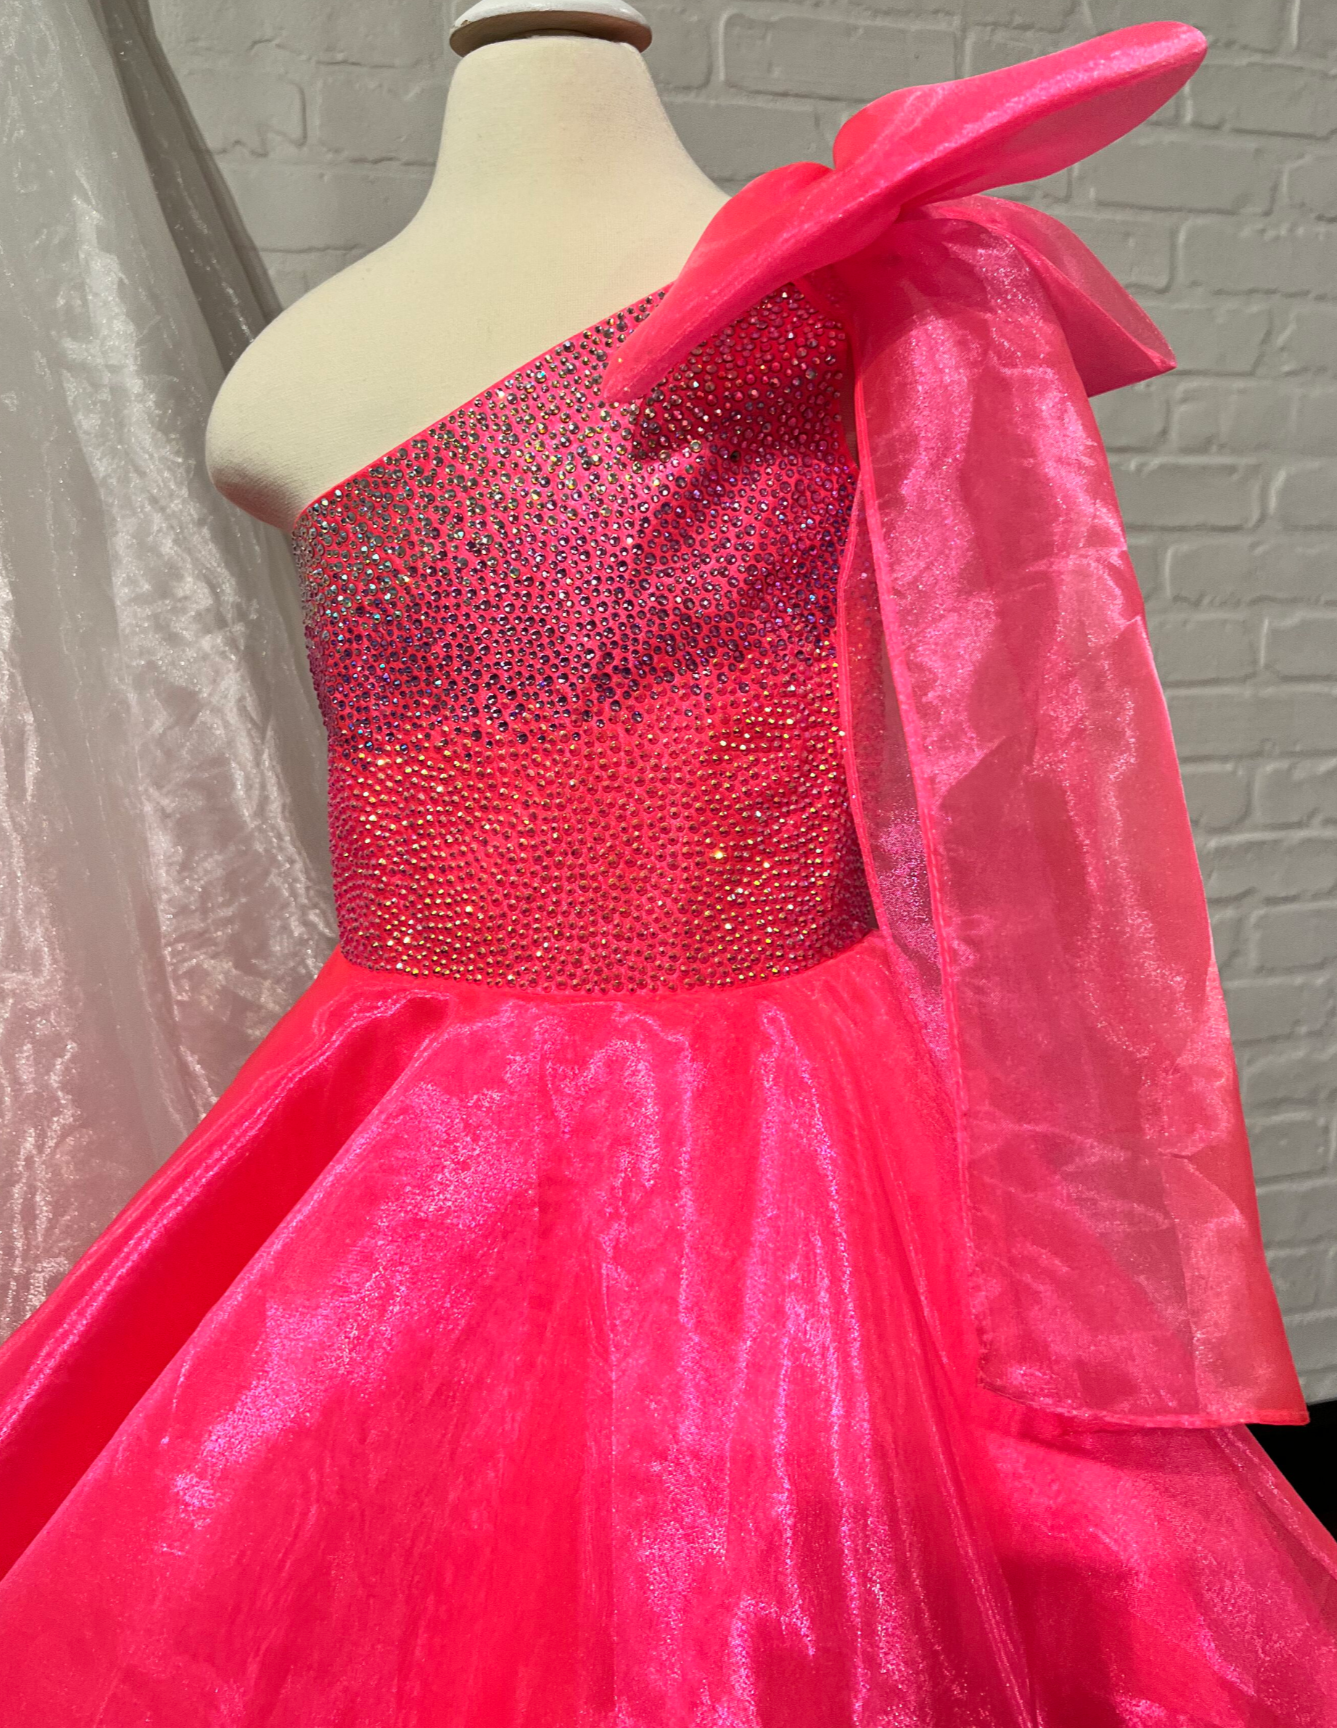 Sugar Kayne C310 Girls and Preteens One Shoulder Bow A Line Shimmer Pageant Dress Crystal Gown  Go ahead and take a BOW in this lovely one-shoulder organza ballgown. The ombre beaded bodice brings all the dazzle!  Colors: Orange, Yellow, Blue, White, Neon Pink